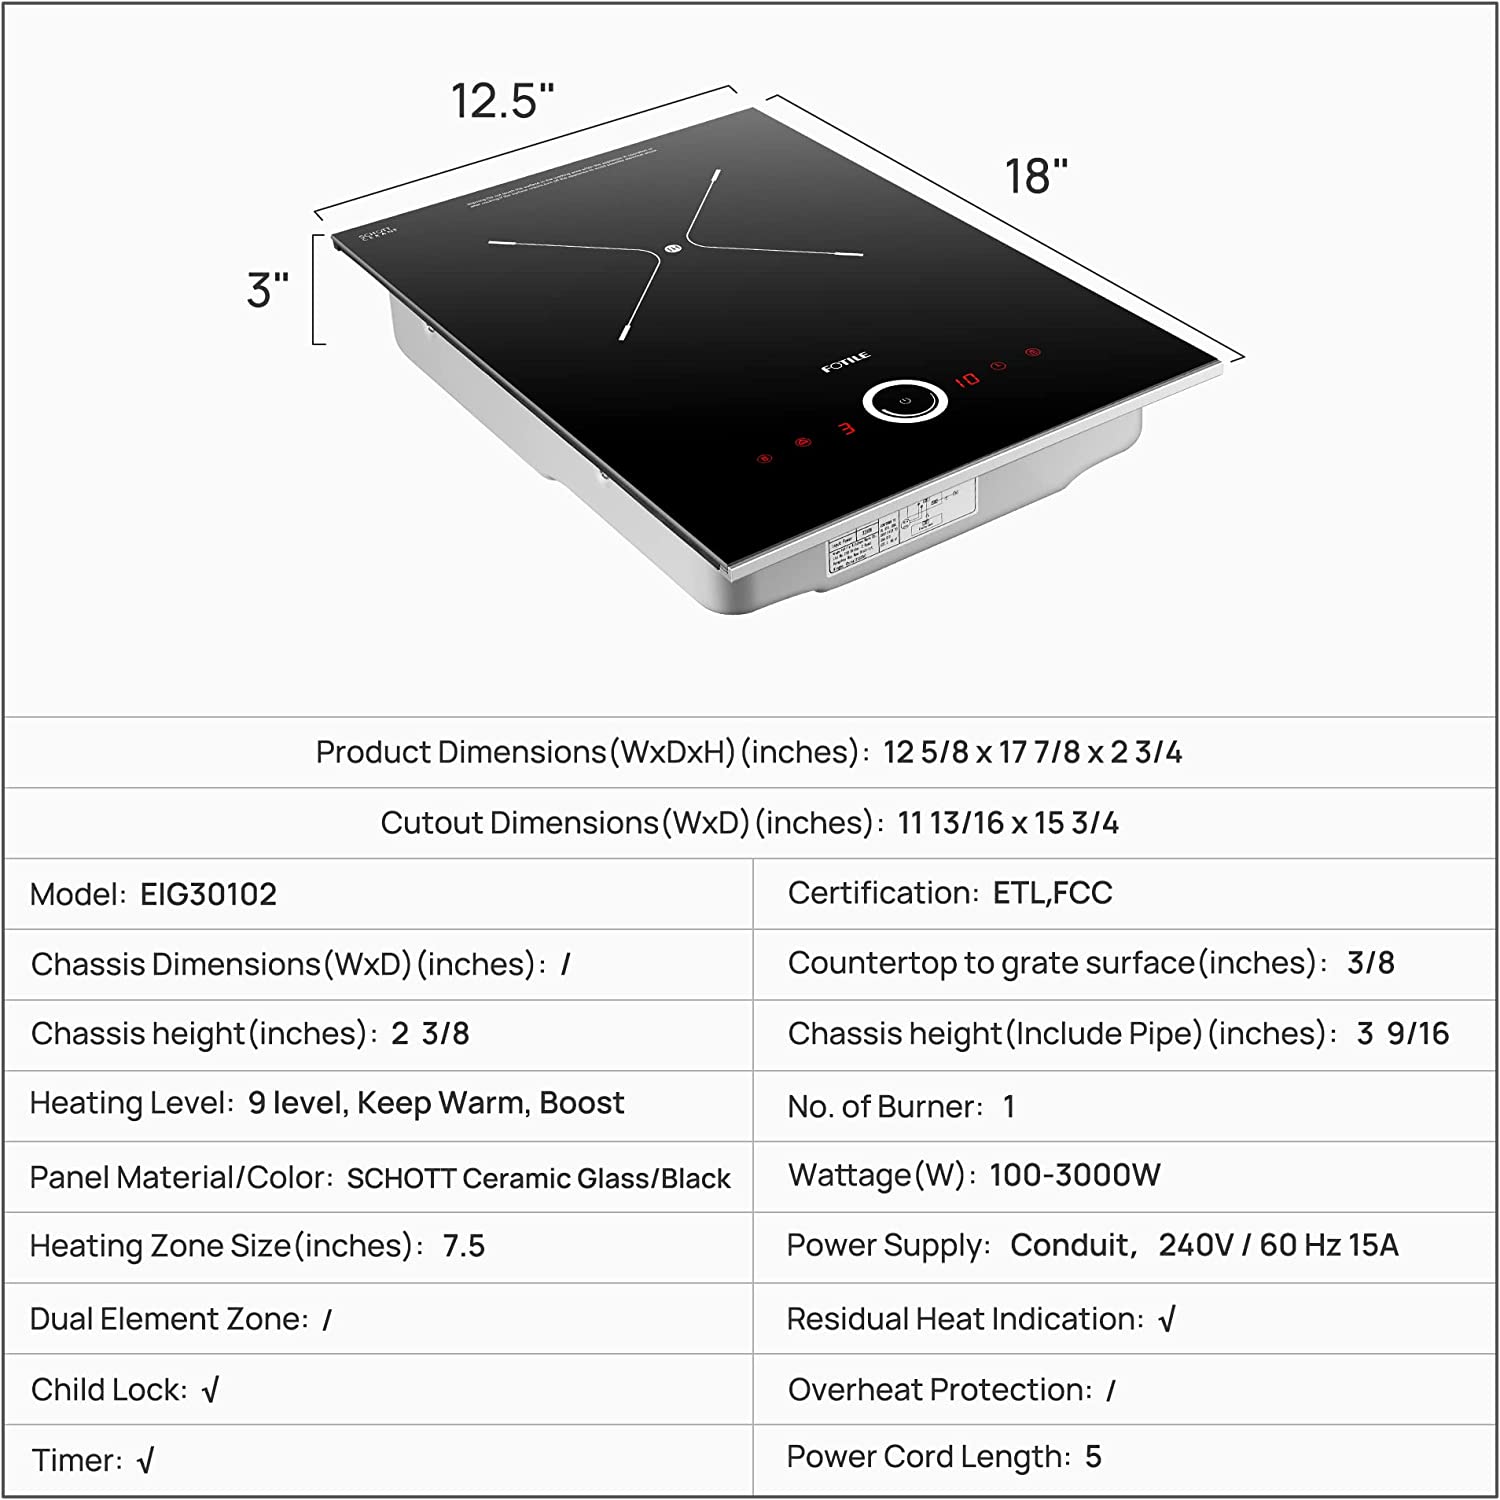  Induction Cooktop 30 Inch, Electric Cooktop 4 Burners, Drop-in  Induction Cooker Ceramic Glass Induction Burner With Timer, Child Lock, 9  Heating Level and Sensor Touch Control, ETL & FCC Certified : Appliances